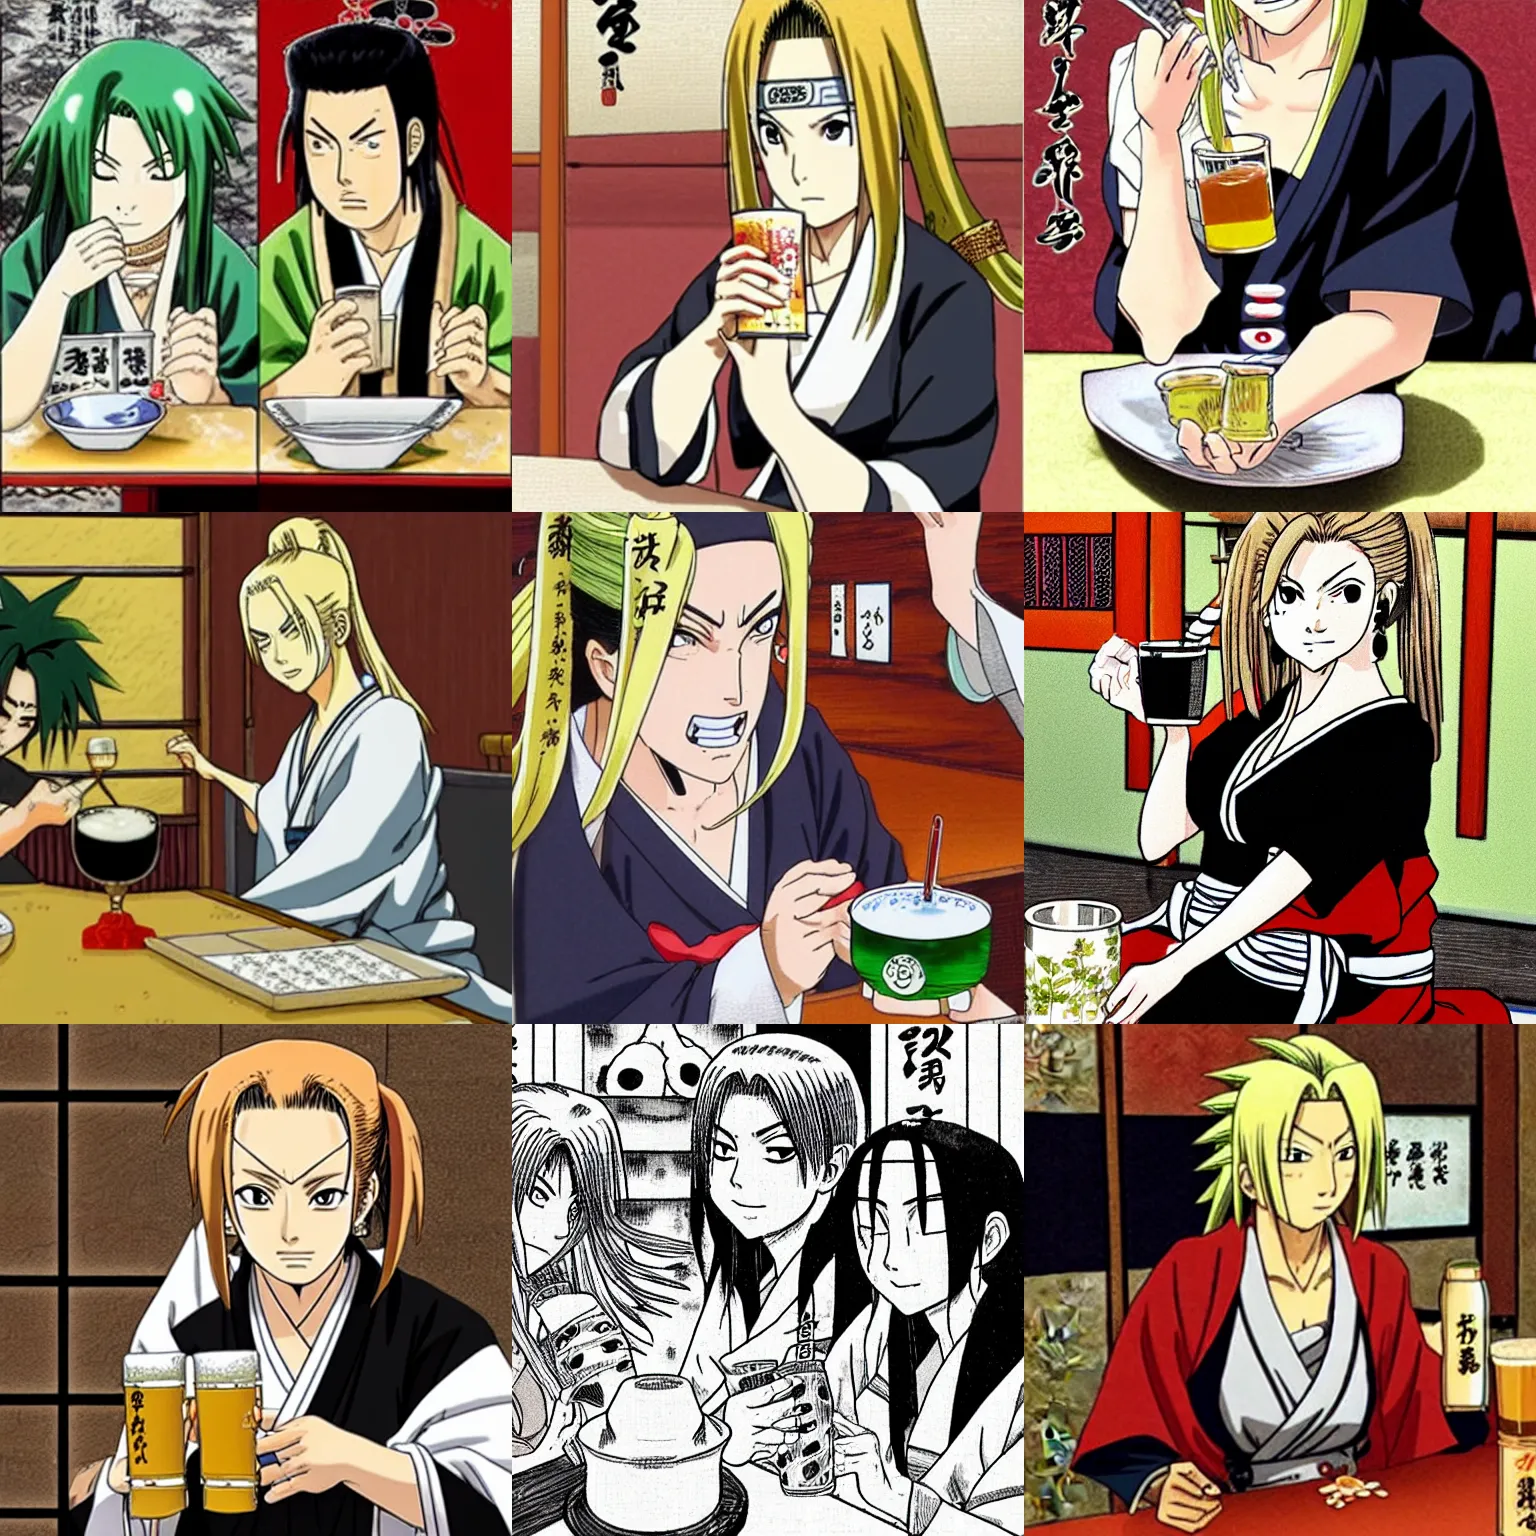 Prompt: Tsunade drinking sake in a japanese pub by Eiichiro Oda in the style of Manga